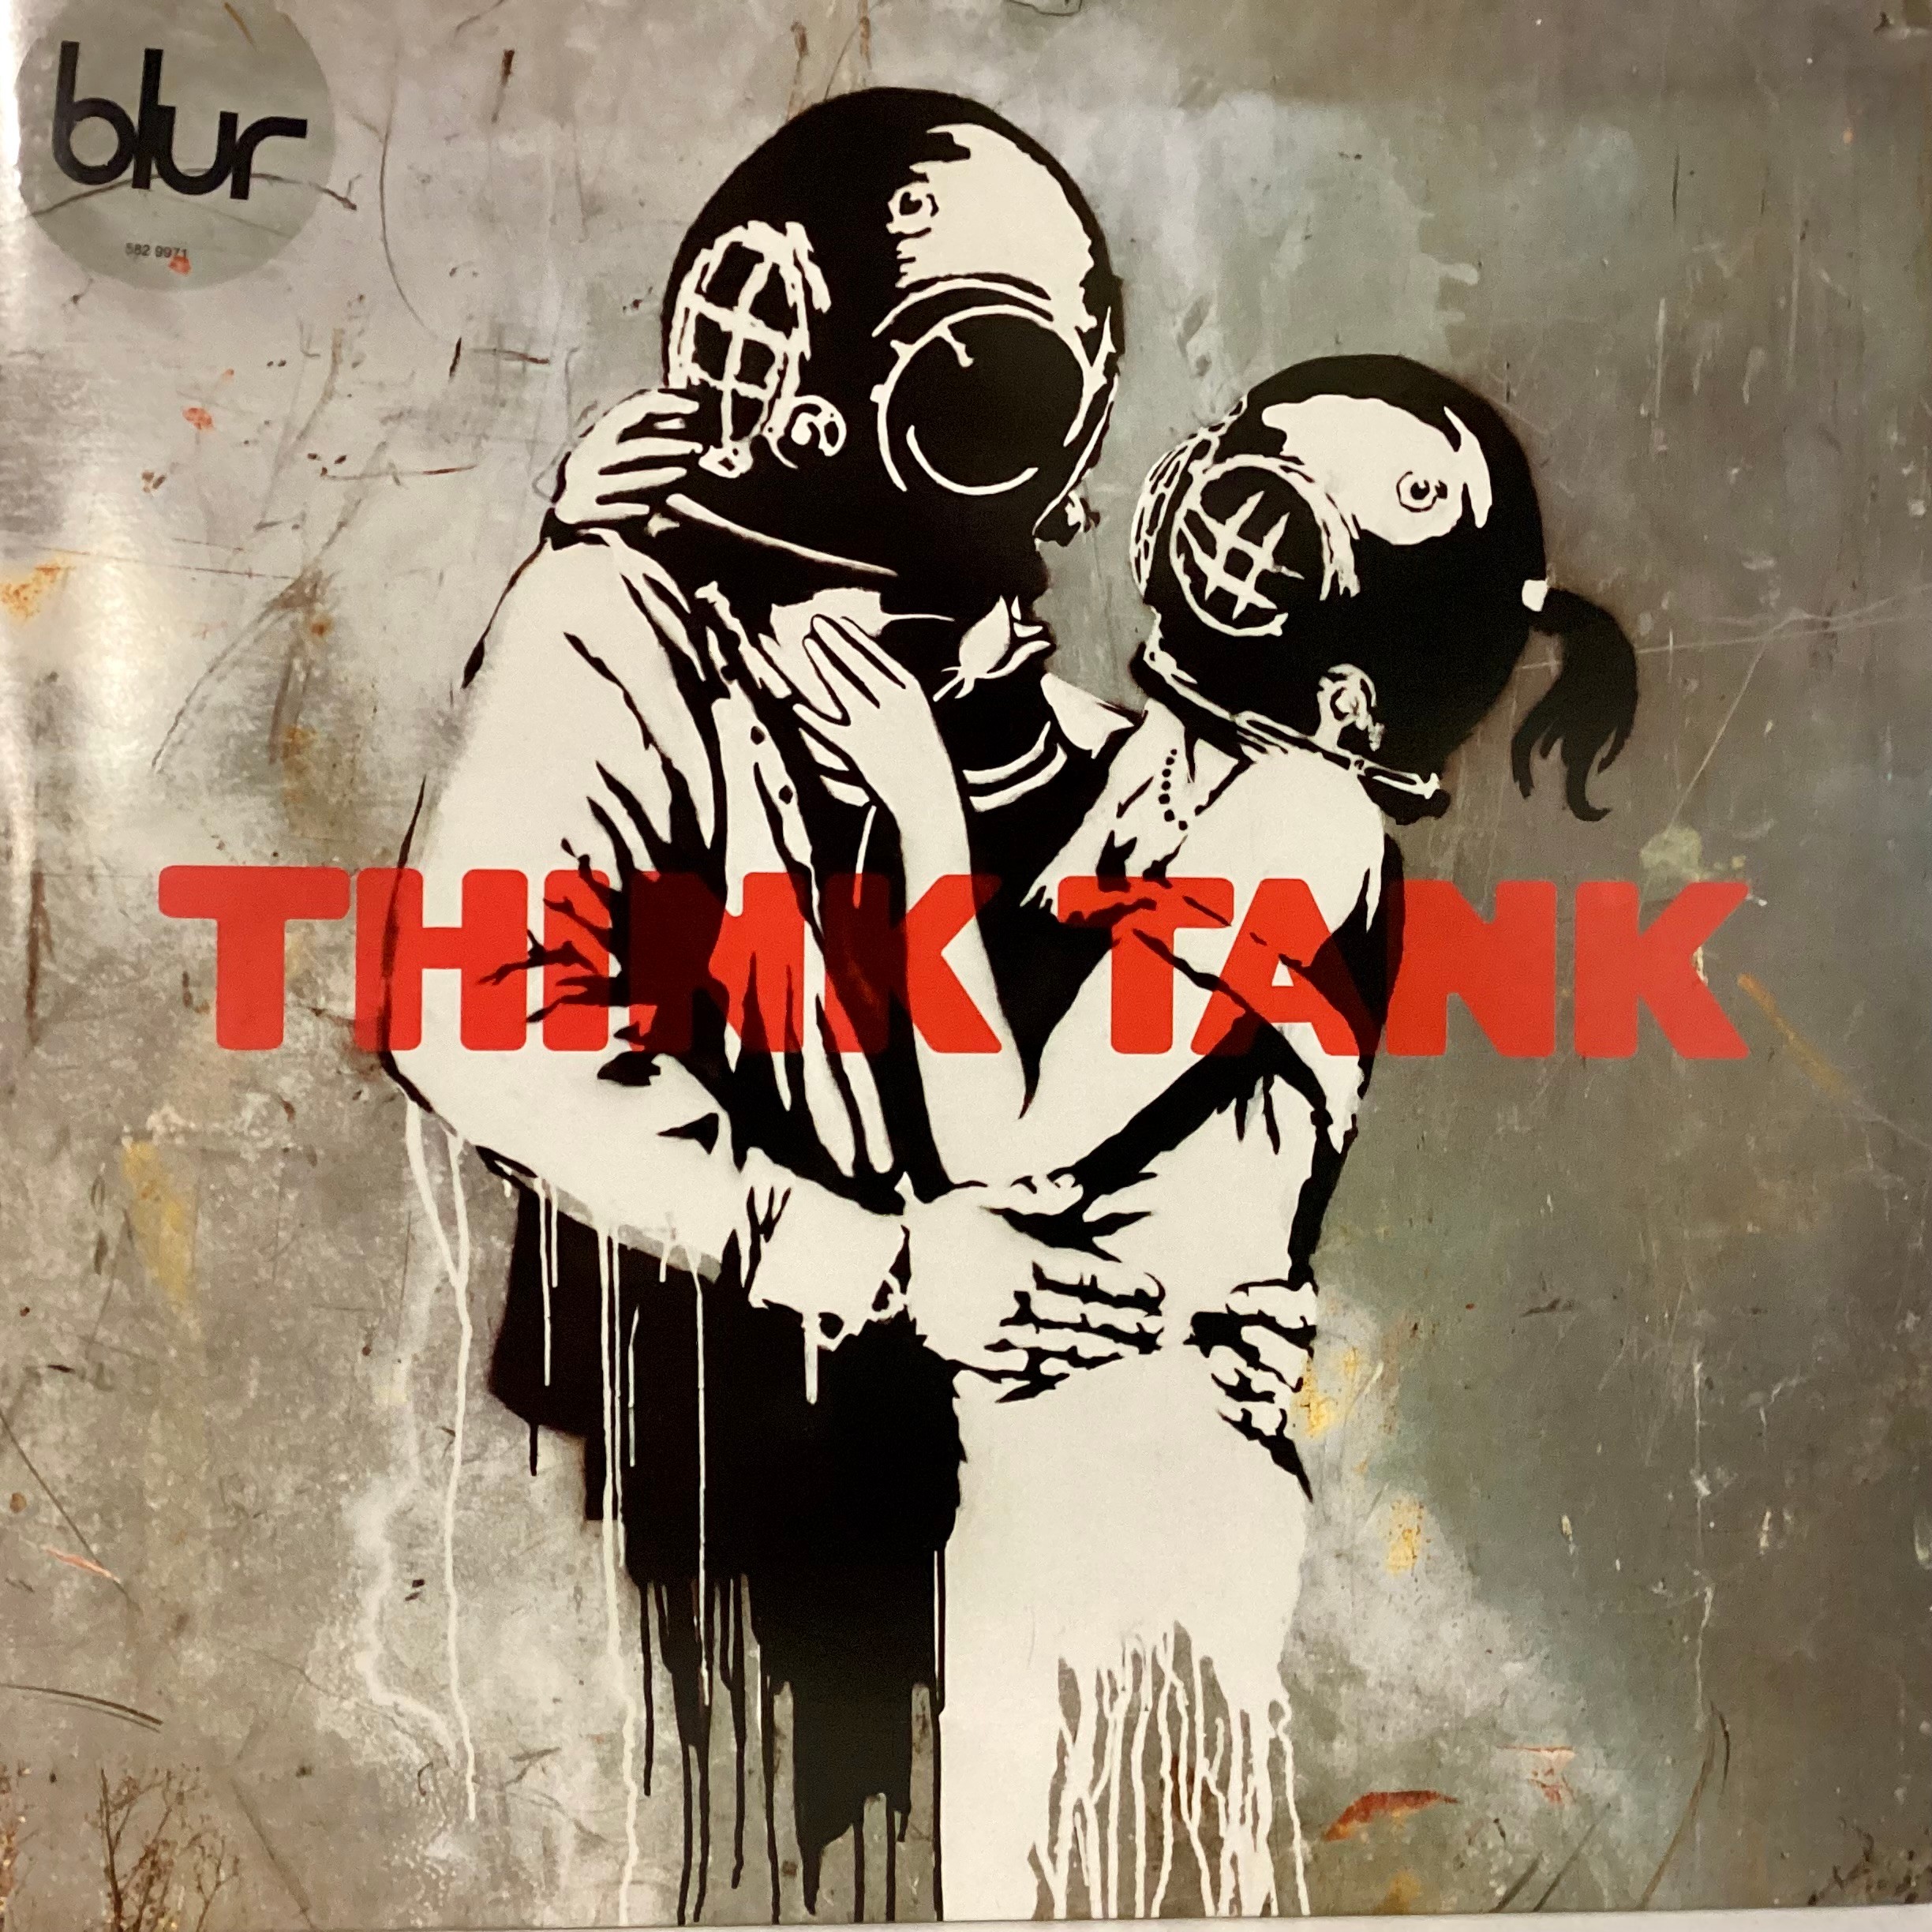 BLUR 'THINK TANK' ORIGINAL 2 X VINYL LP. Both the records and gatefold sleeve/inners are in Ex